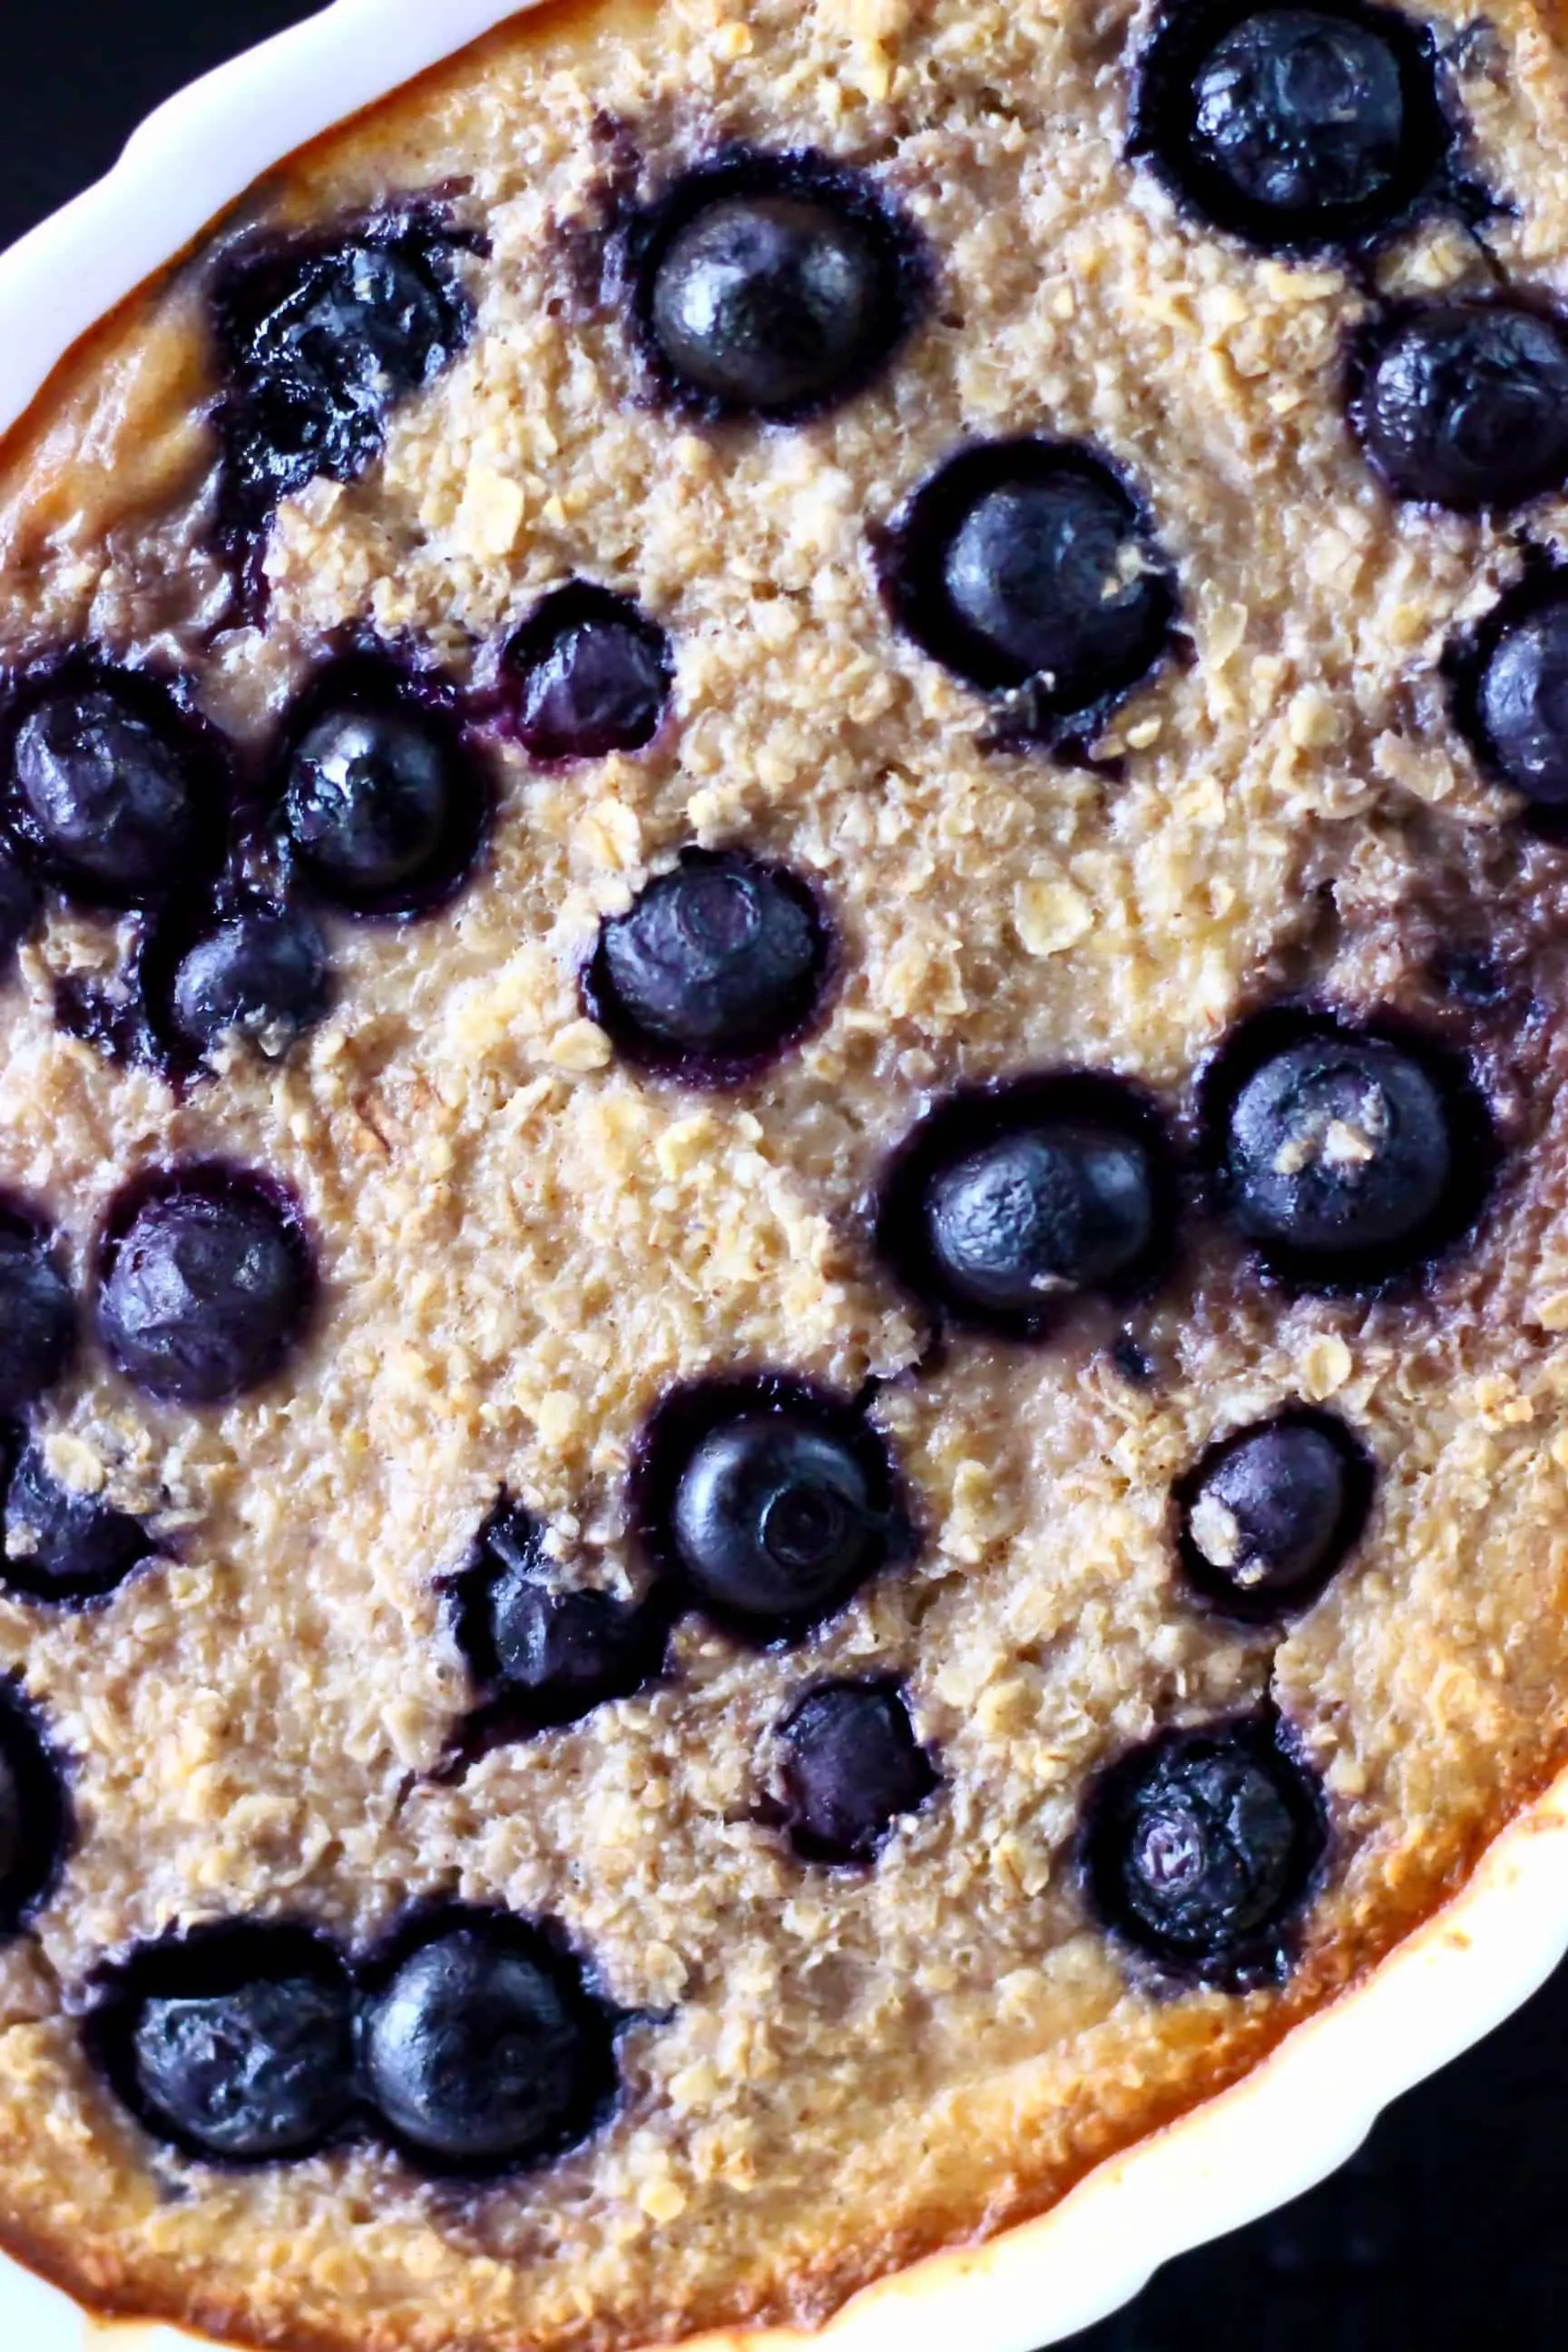 Vegan blueberry banana baked oatmeal in a white oval dish